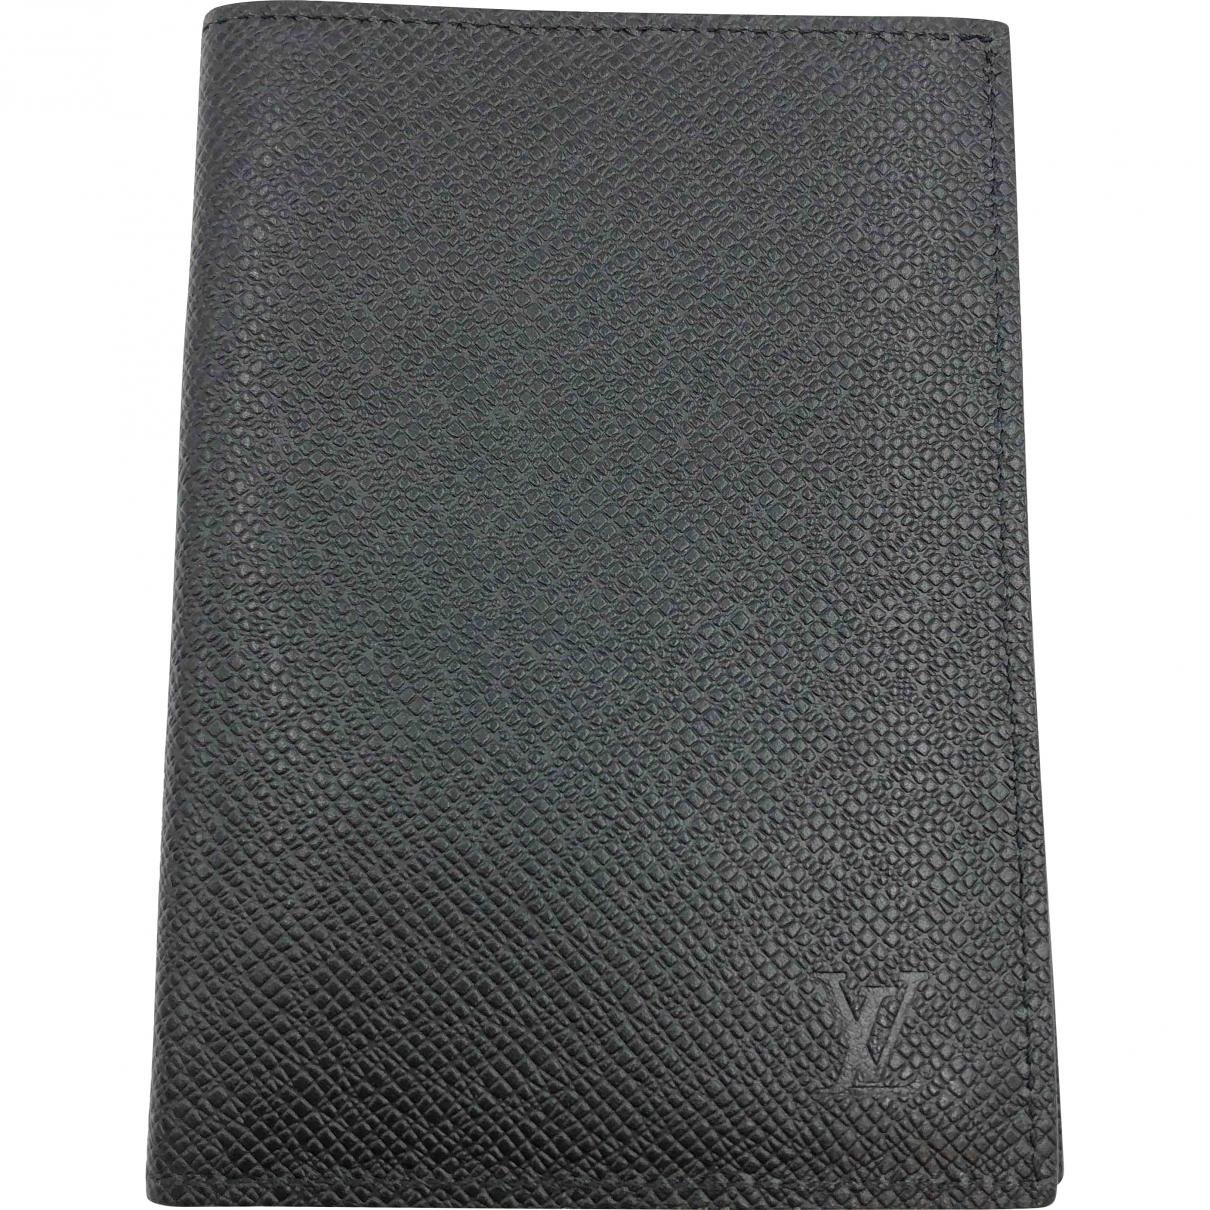 Louis Vuitton Pocket Organizer Black Leather Small Bag, Wallets & Cases in Black for Men - Lyst